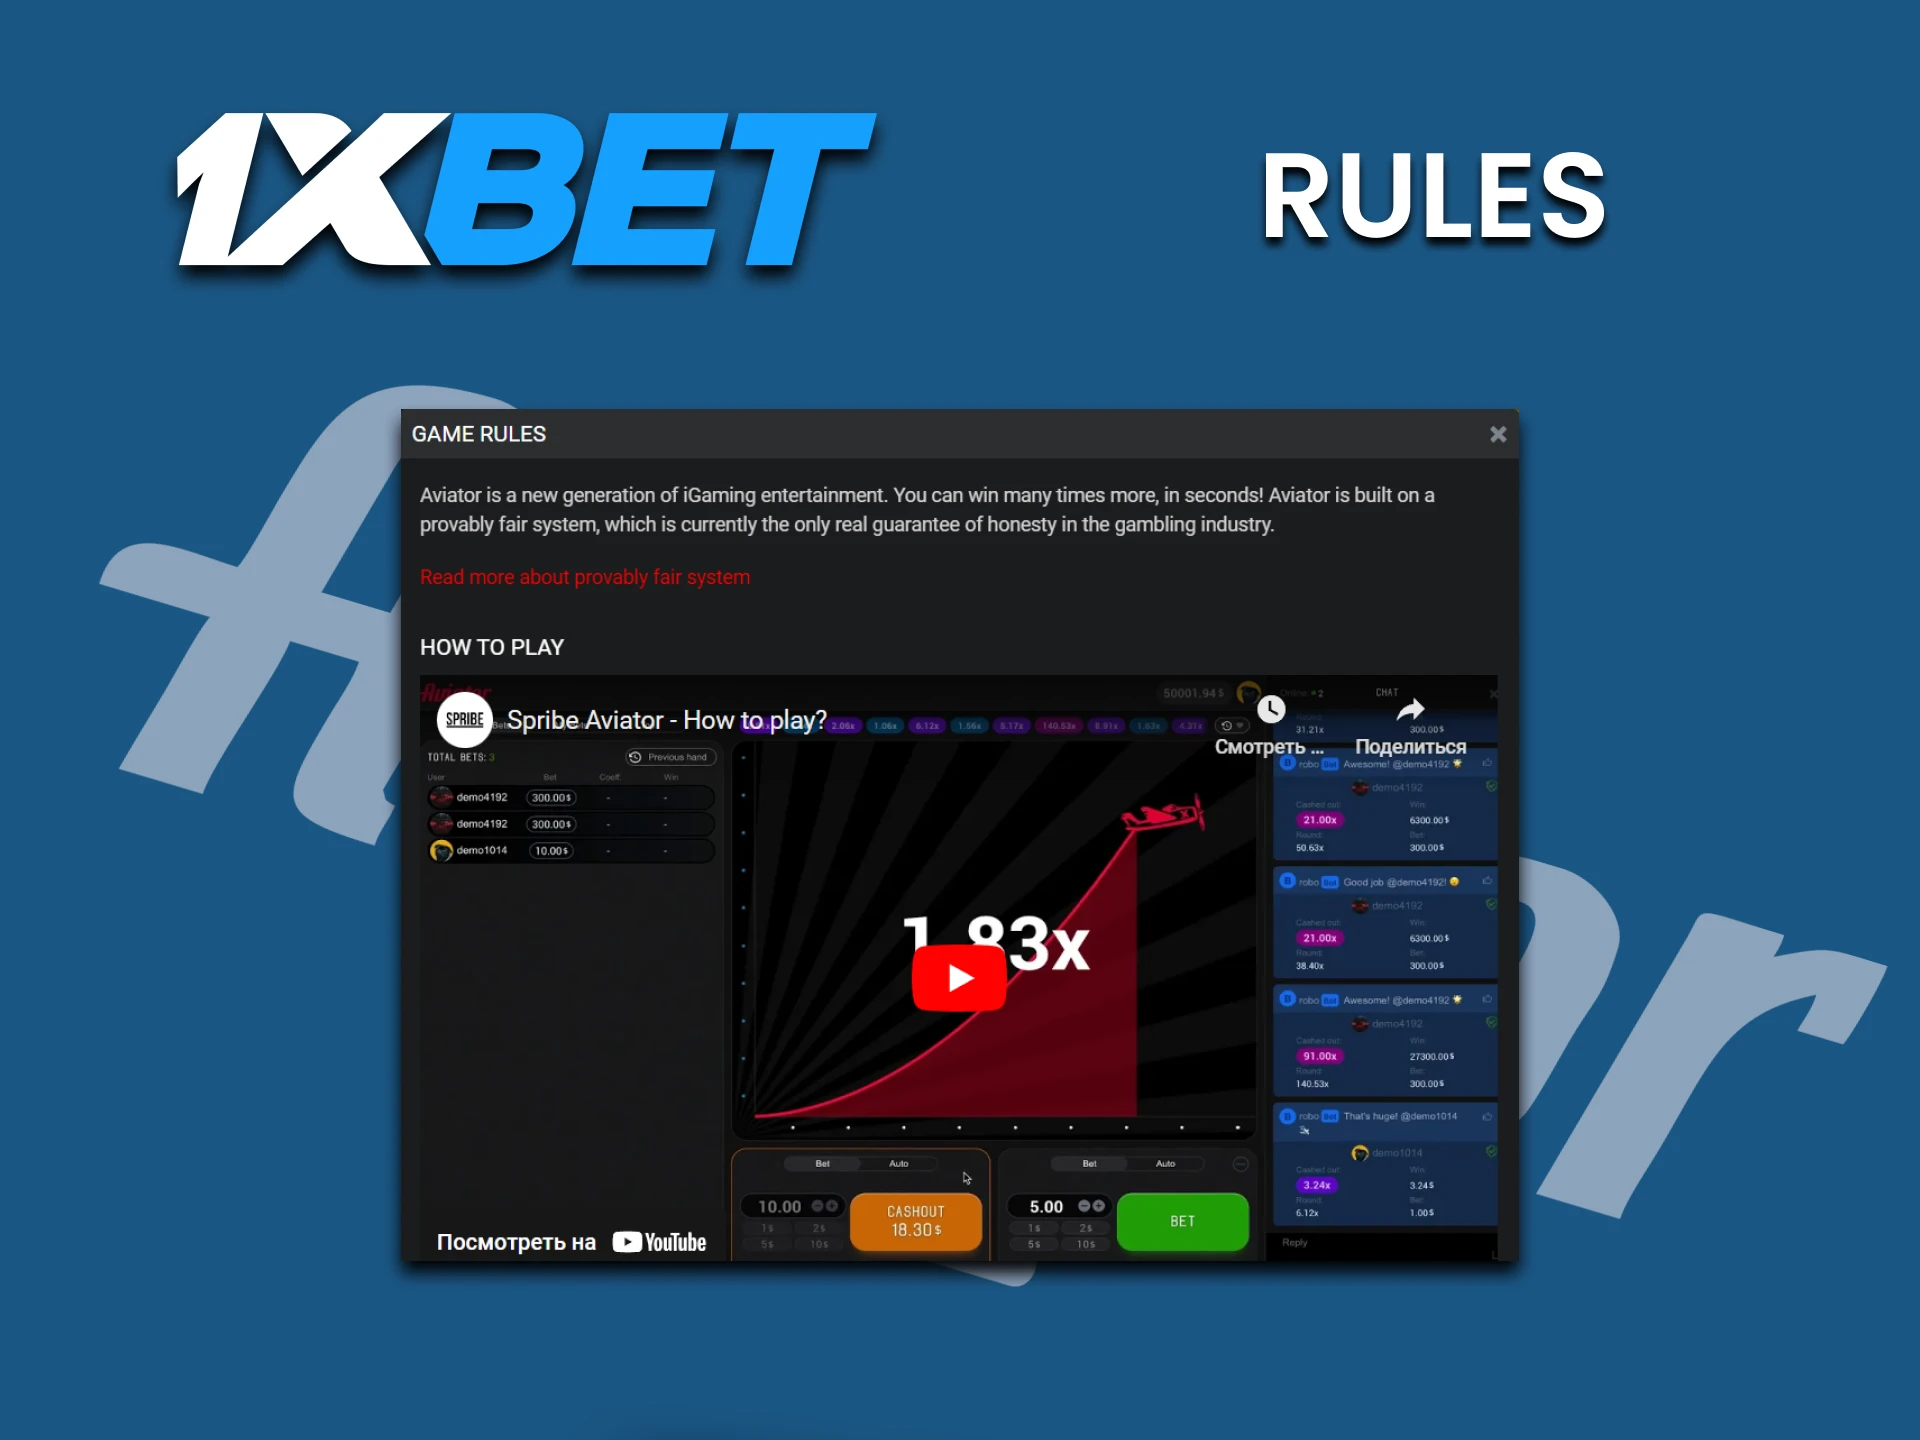 Be sure to study the rules of the Aviator game on 1xbet.